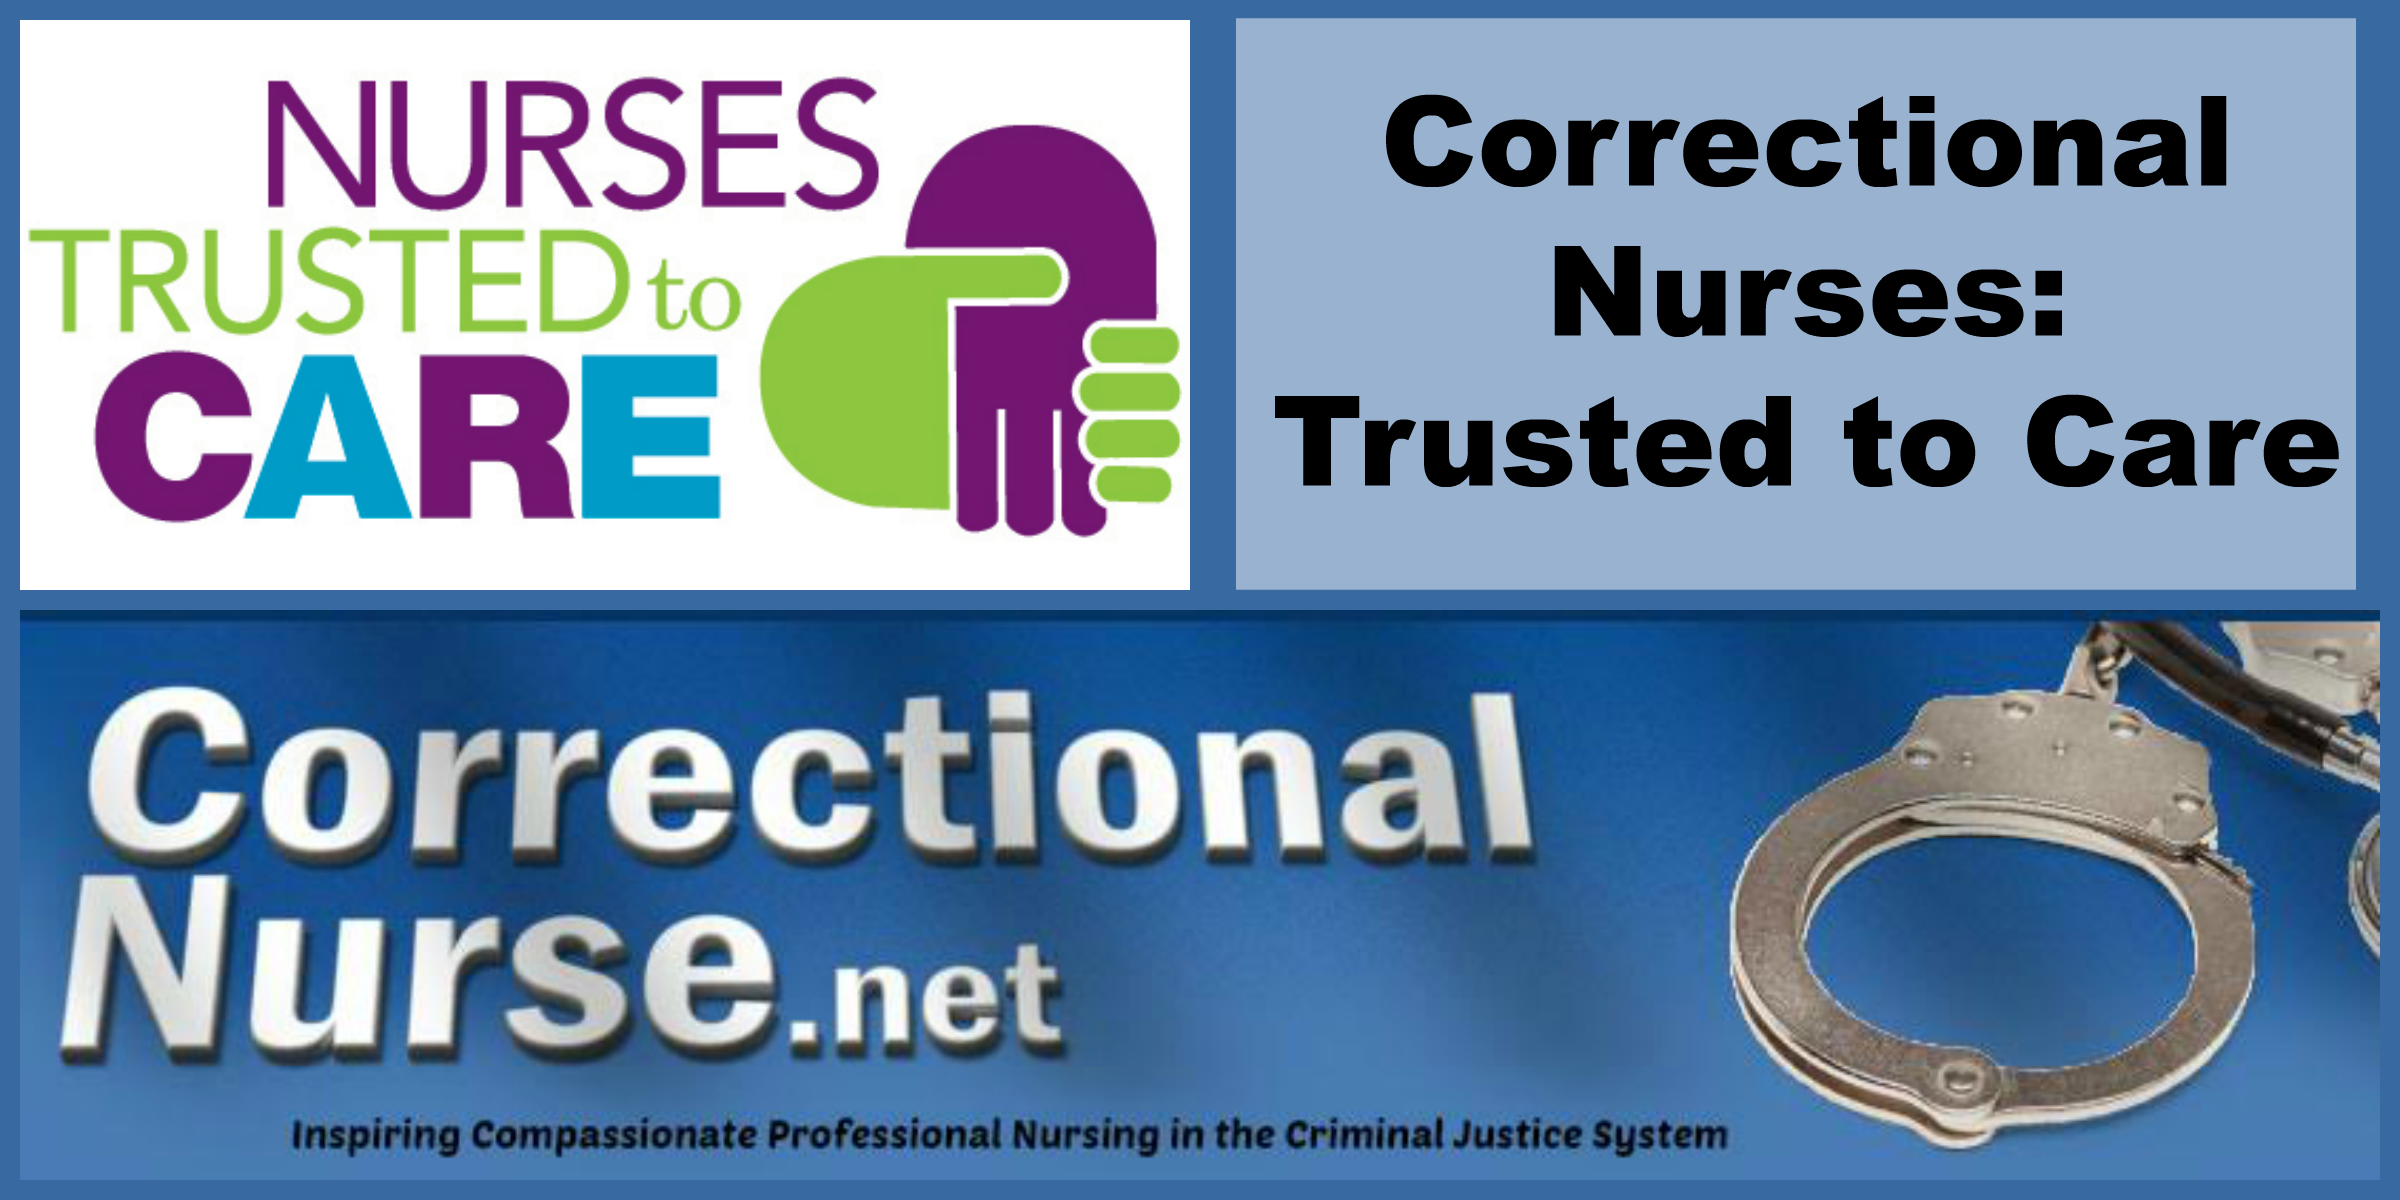 Correctional Nurses: Trusted to Care